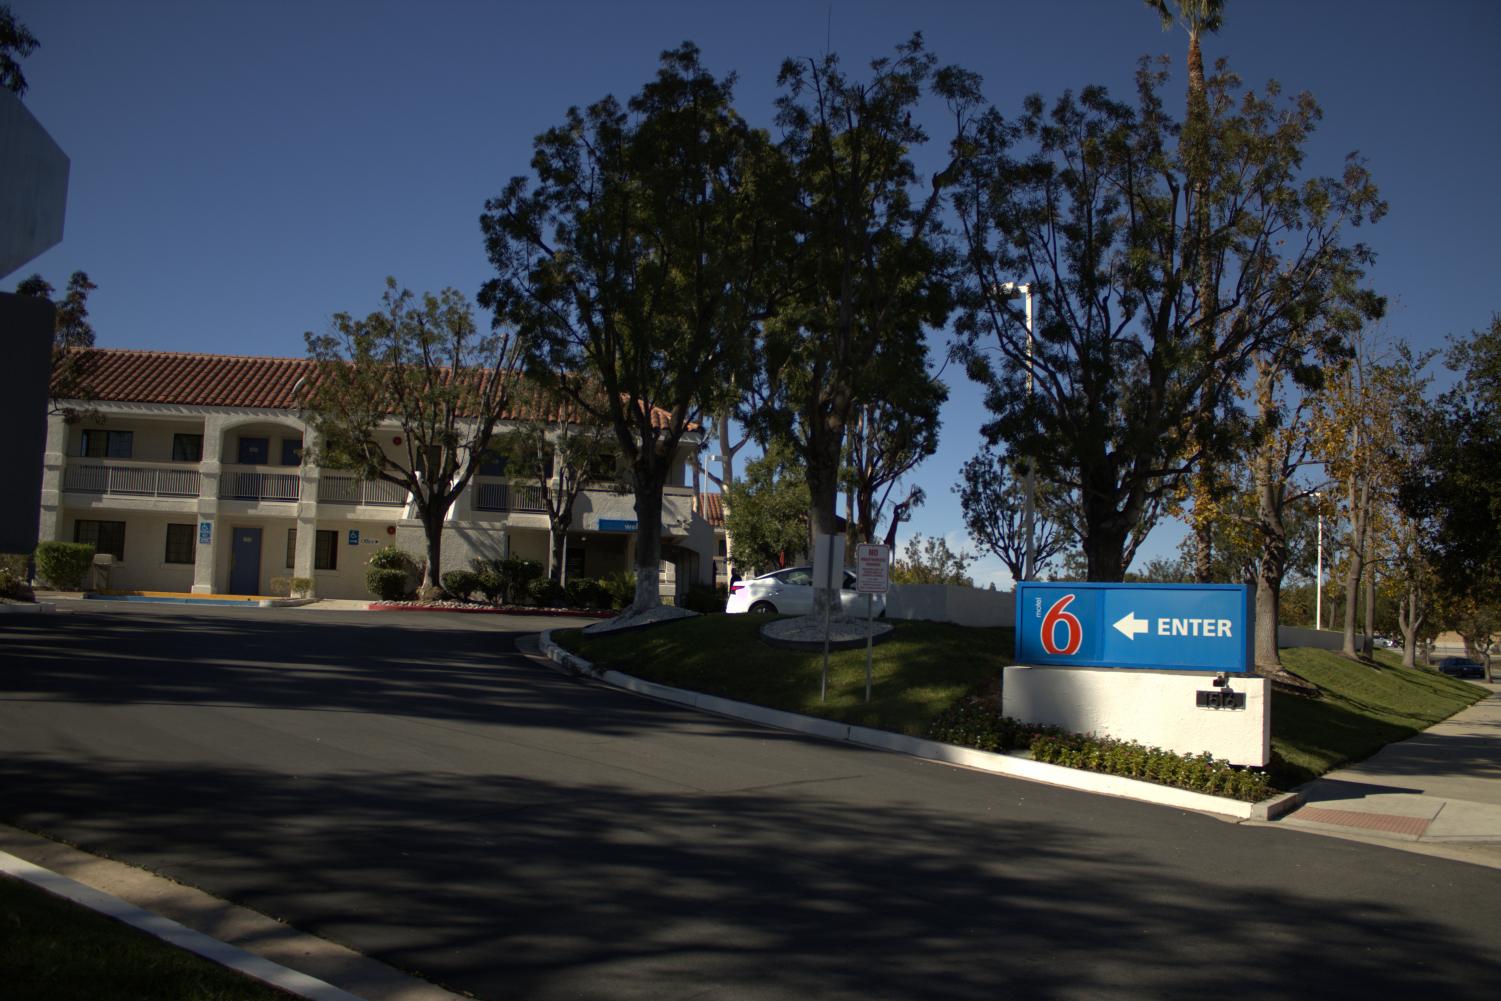 The Motel 6 off Conejo Blvd. served as a homeless shelter during the COVID-19 pandemic. It offered homeless people of Conejo Valley a place to quarantine and self isolate.